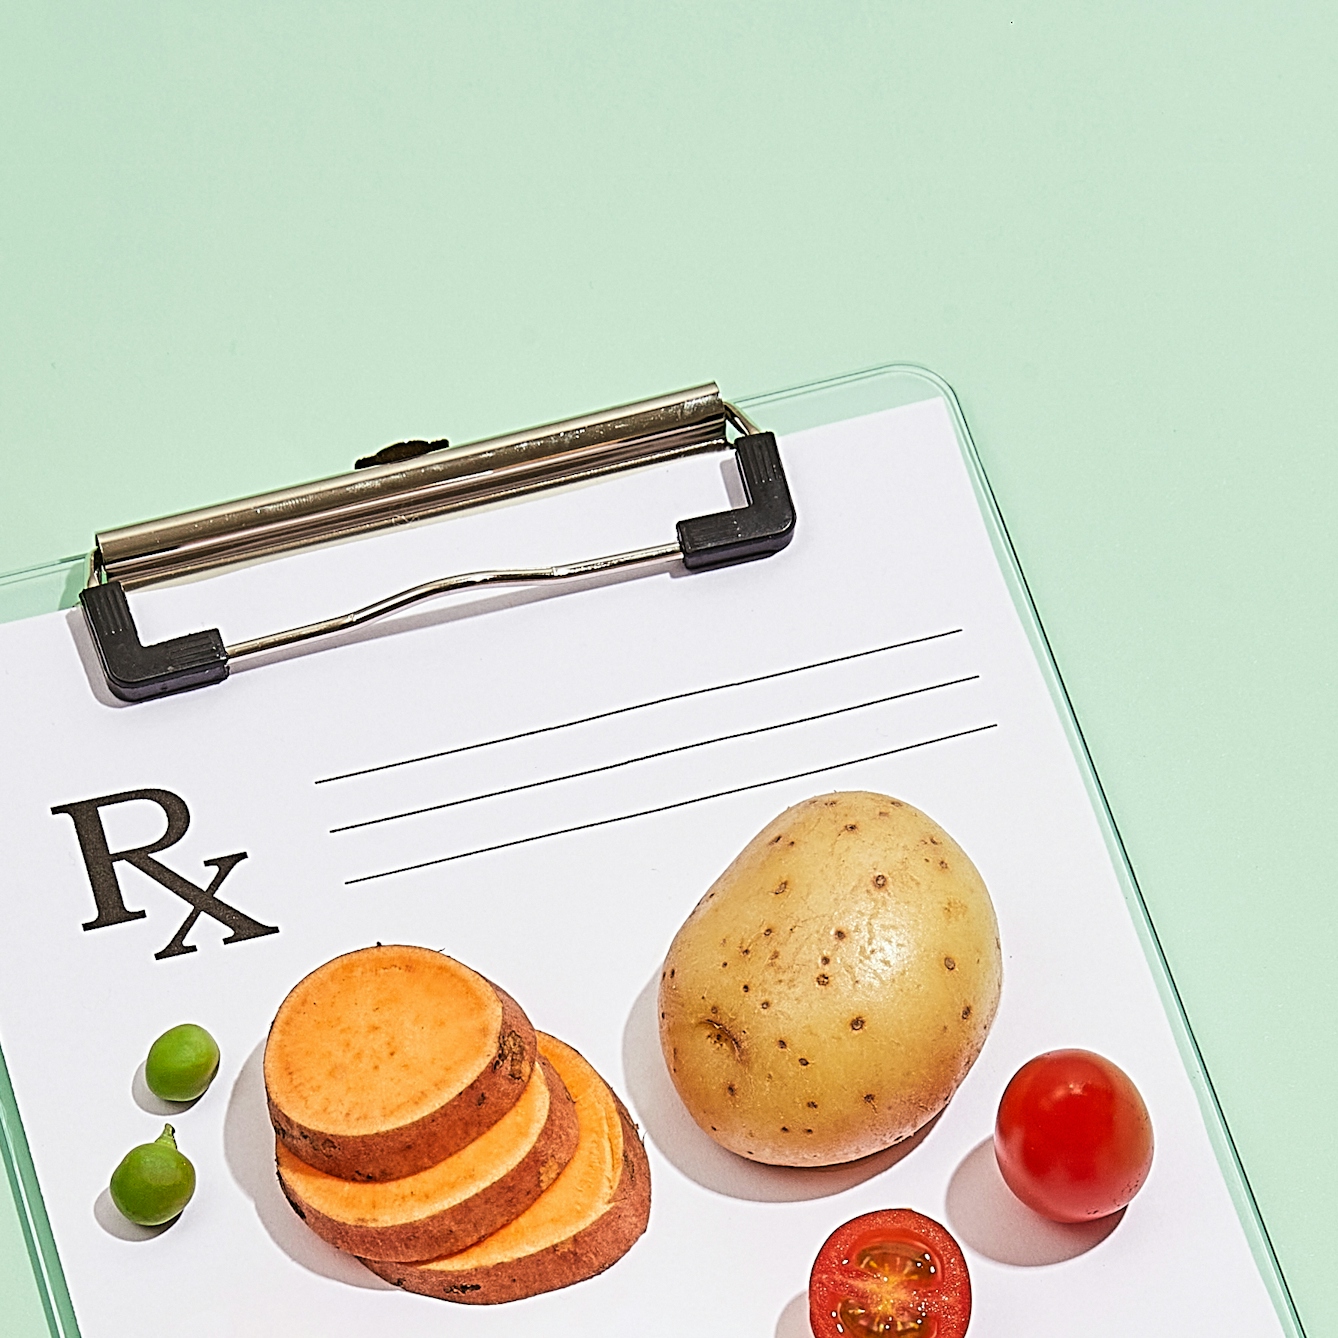 Photograph of a clipboard with a blank doctor's prescription note attached to it, resting on a light green background. On top of the paper prescription are a whole potato, a stack of sliced sweet potato, whole and halved cherry tomatoes and green peas.